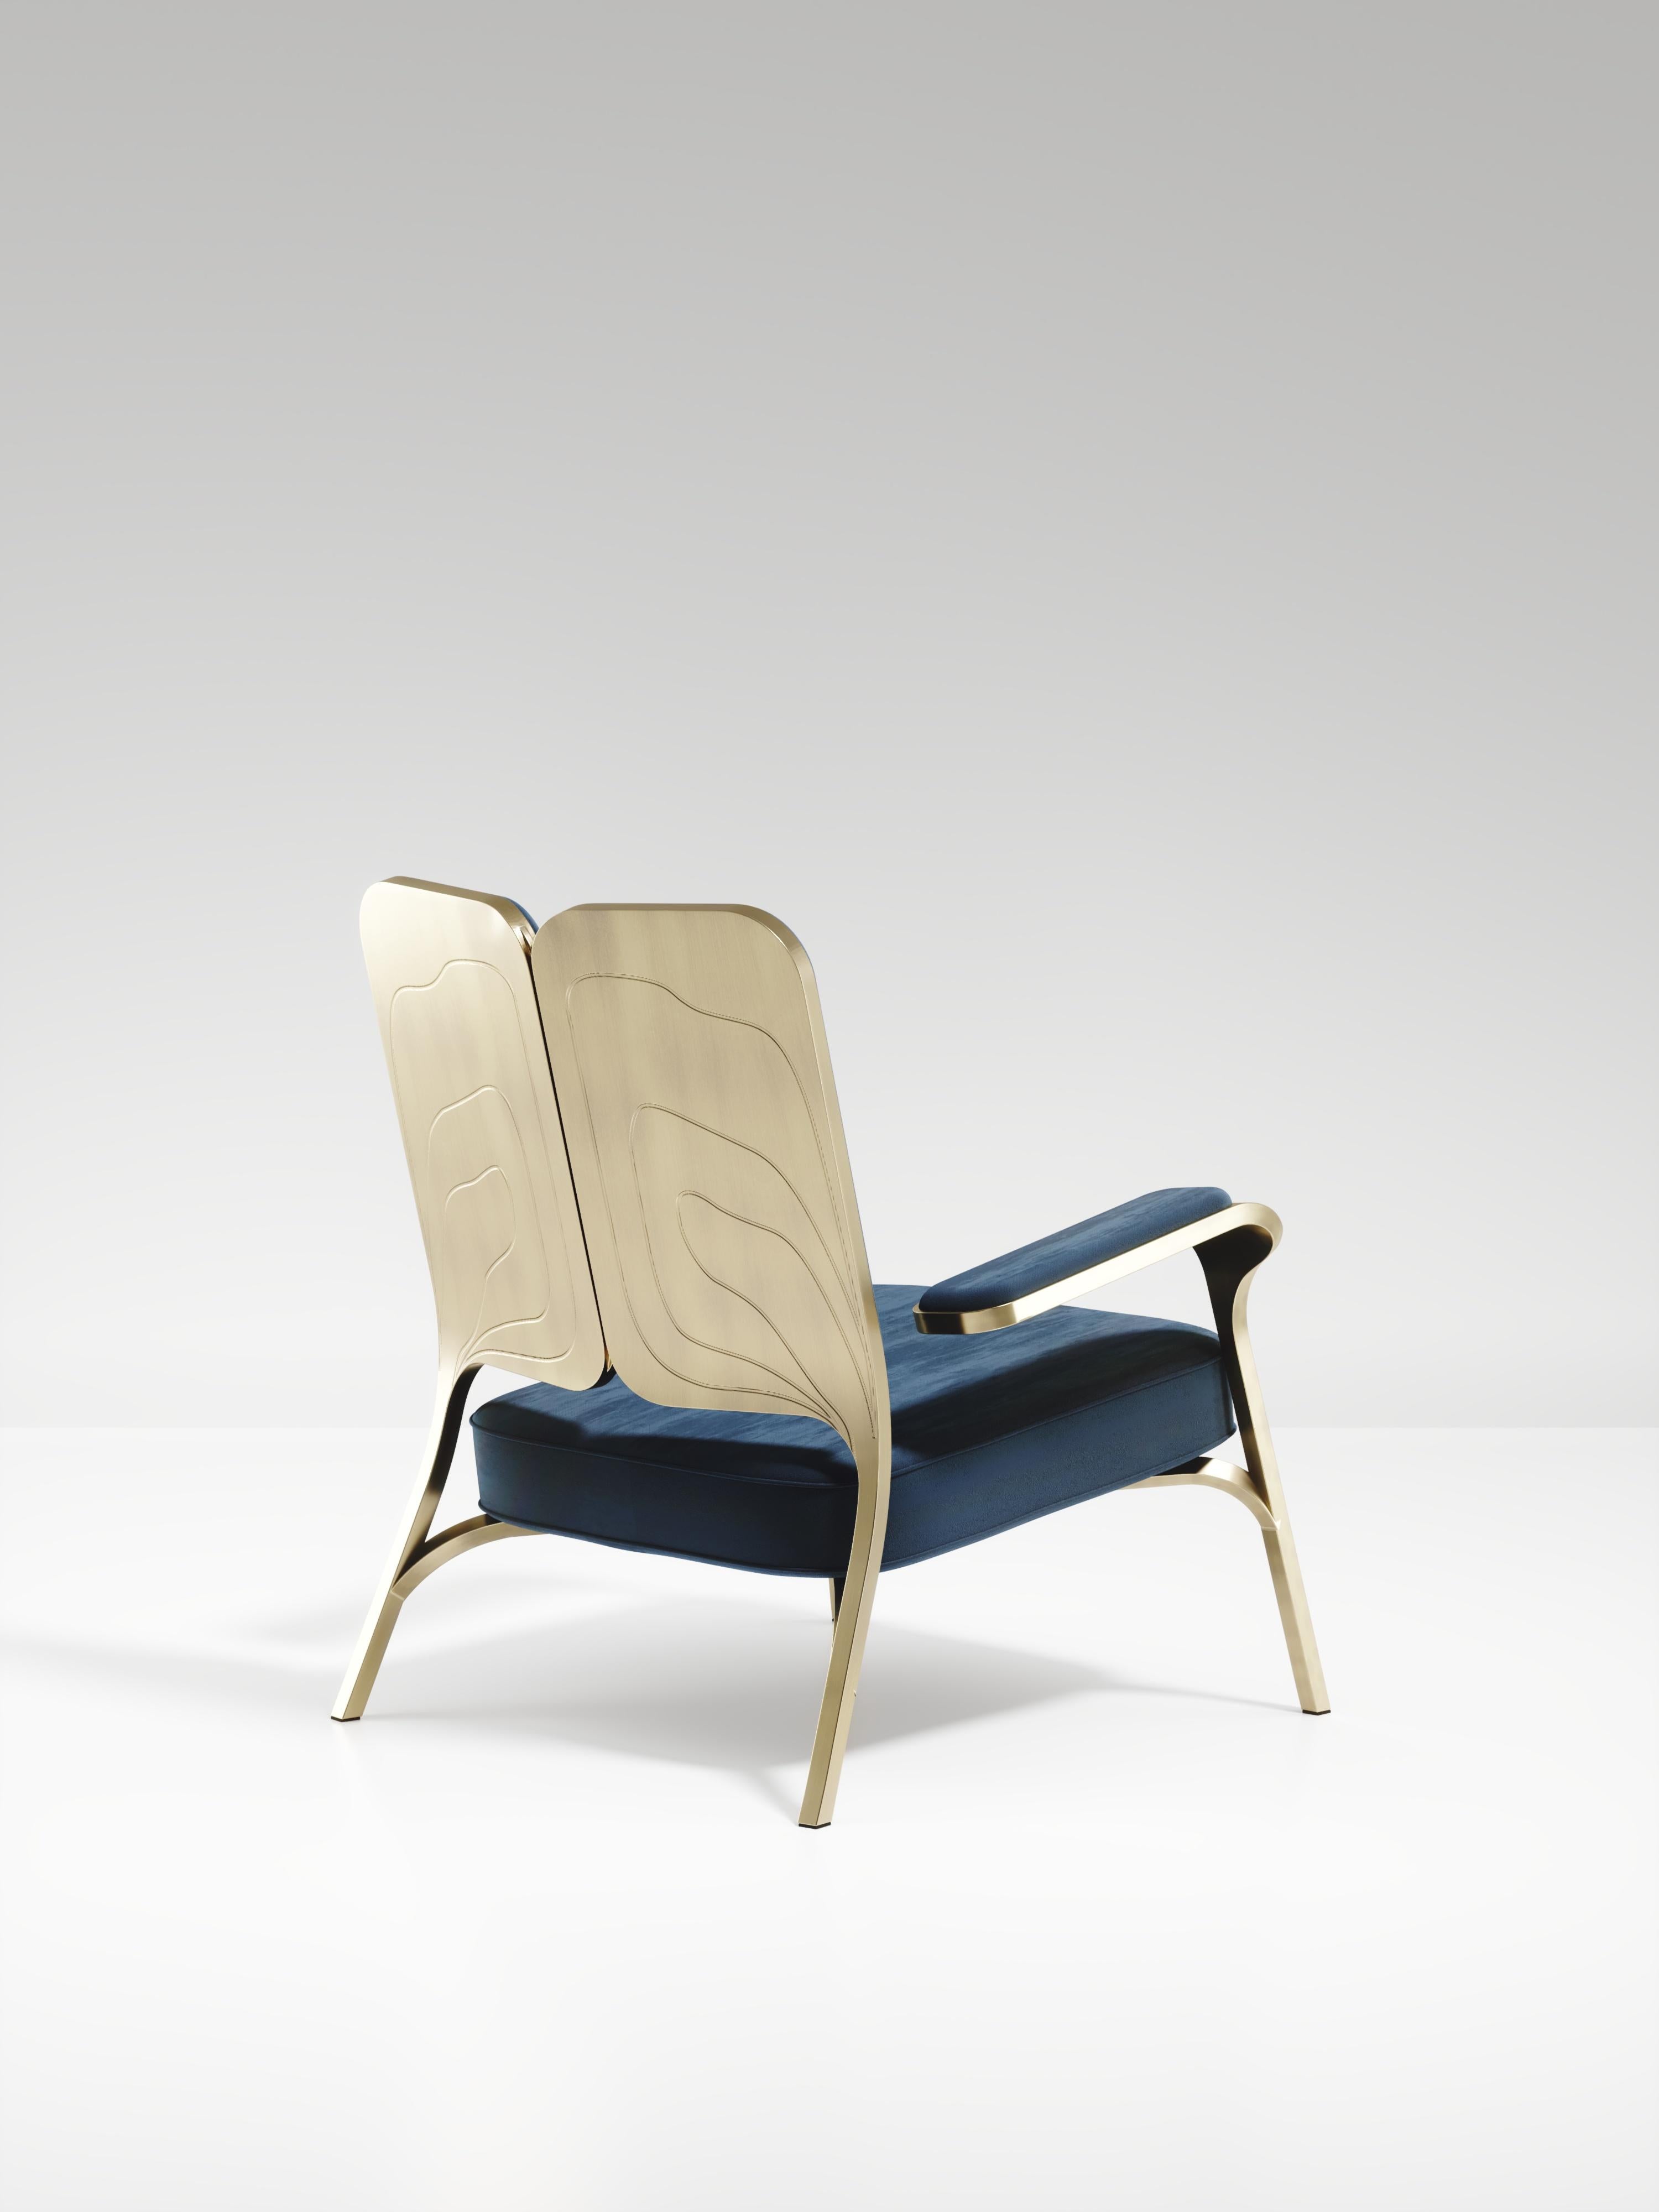 The Gingko armchair by R & Y Augousti is an elegant and whimsical piece. The blue velvet upholstered piece provides comfort while exuding a playful aesthetic in its abstract nod to a butterfly with the form of its backrest and intricate engraving